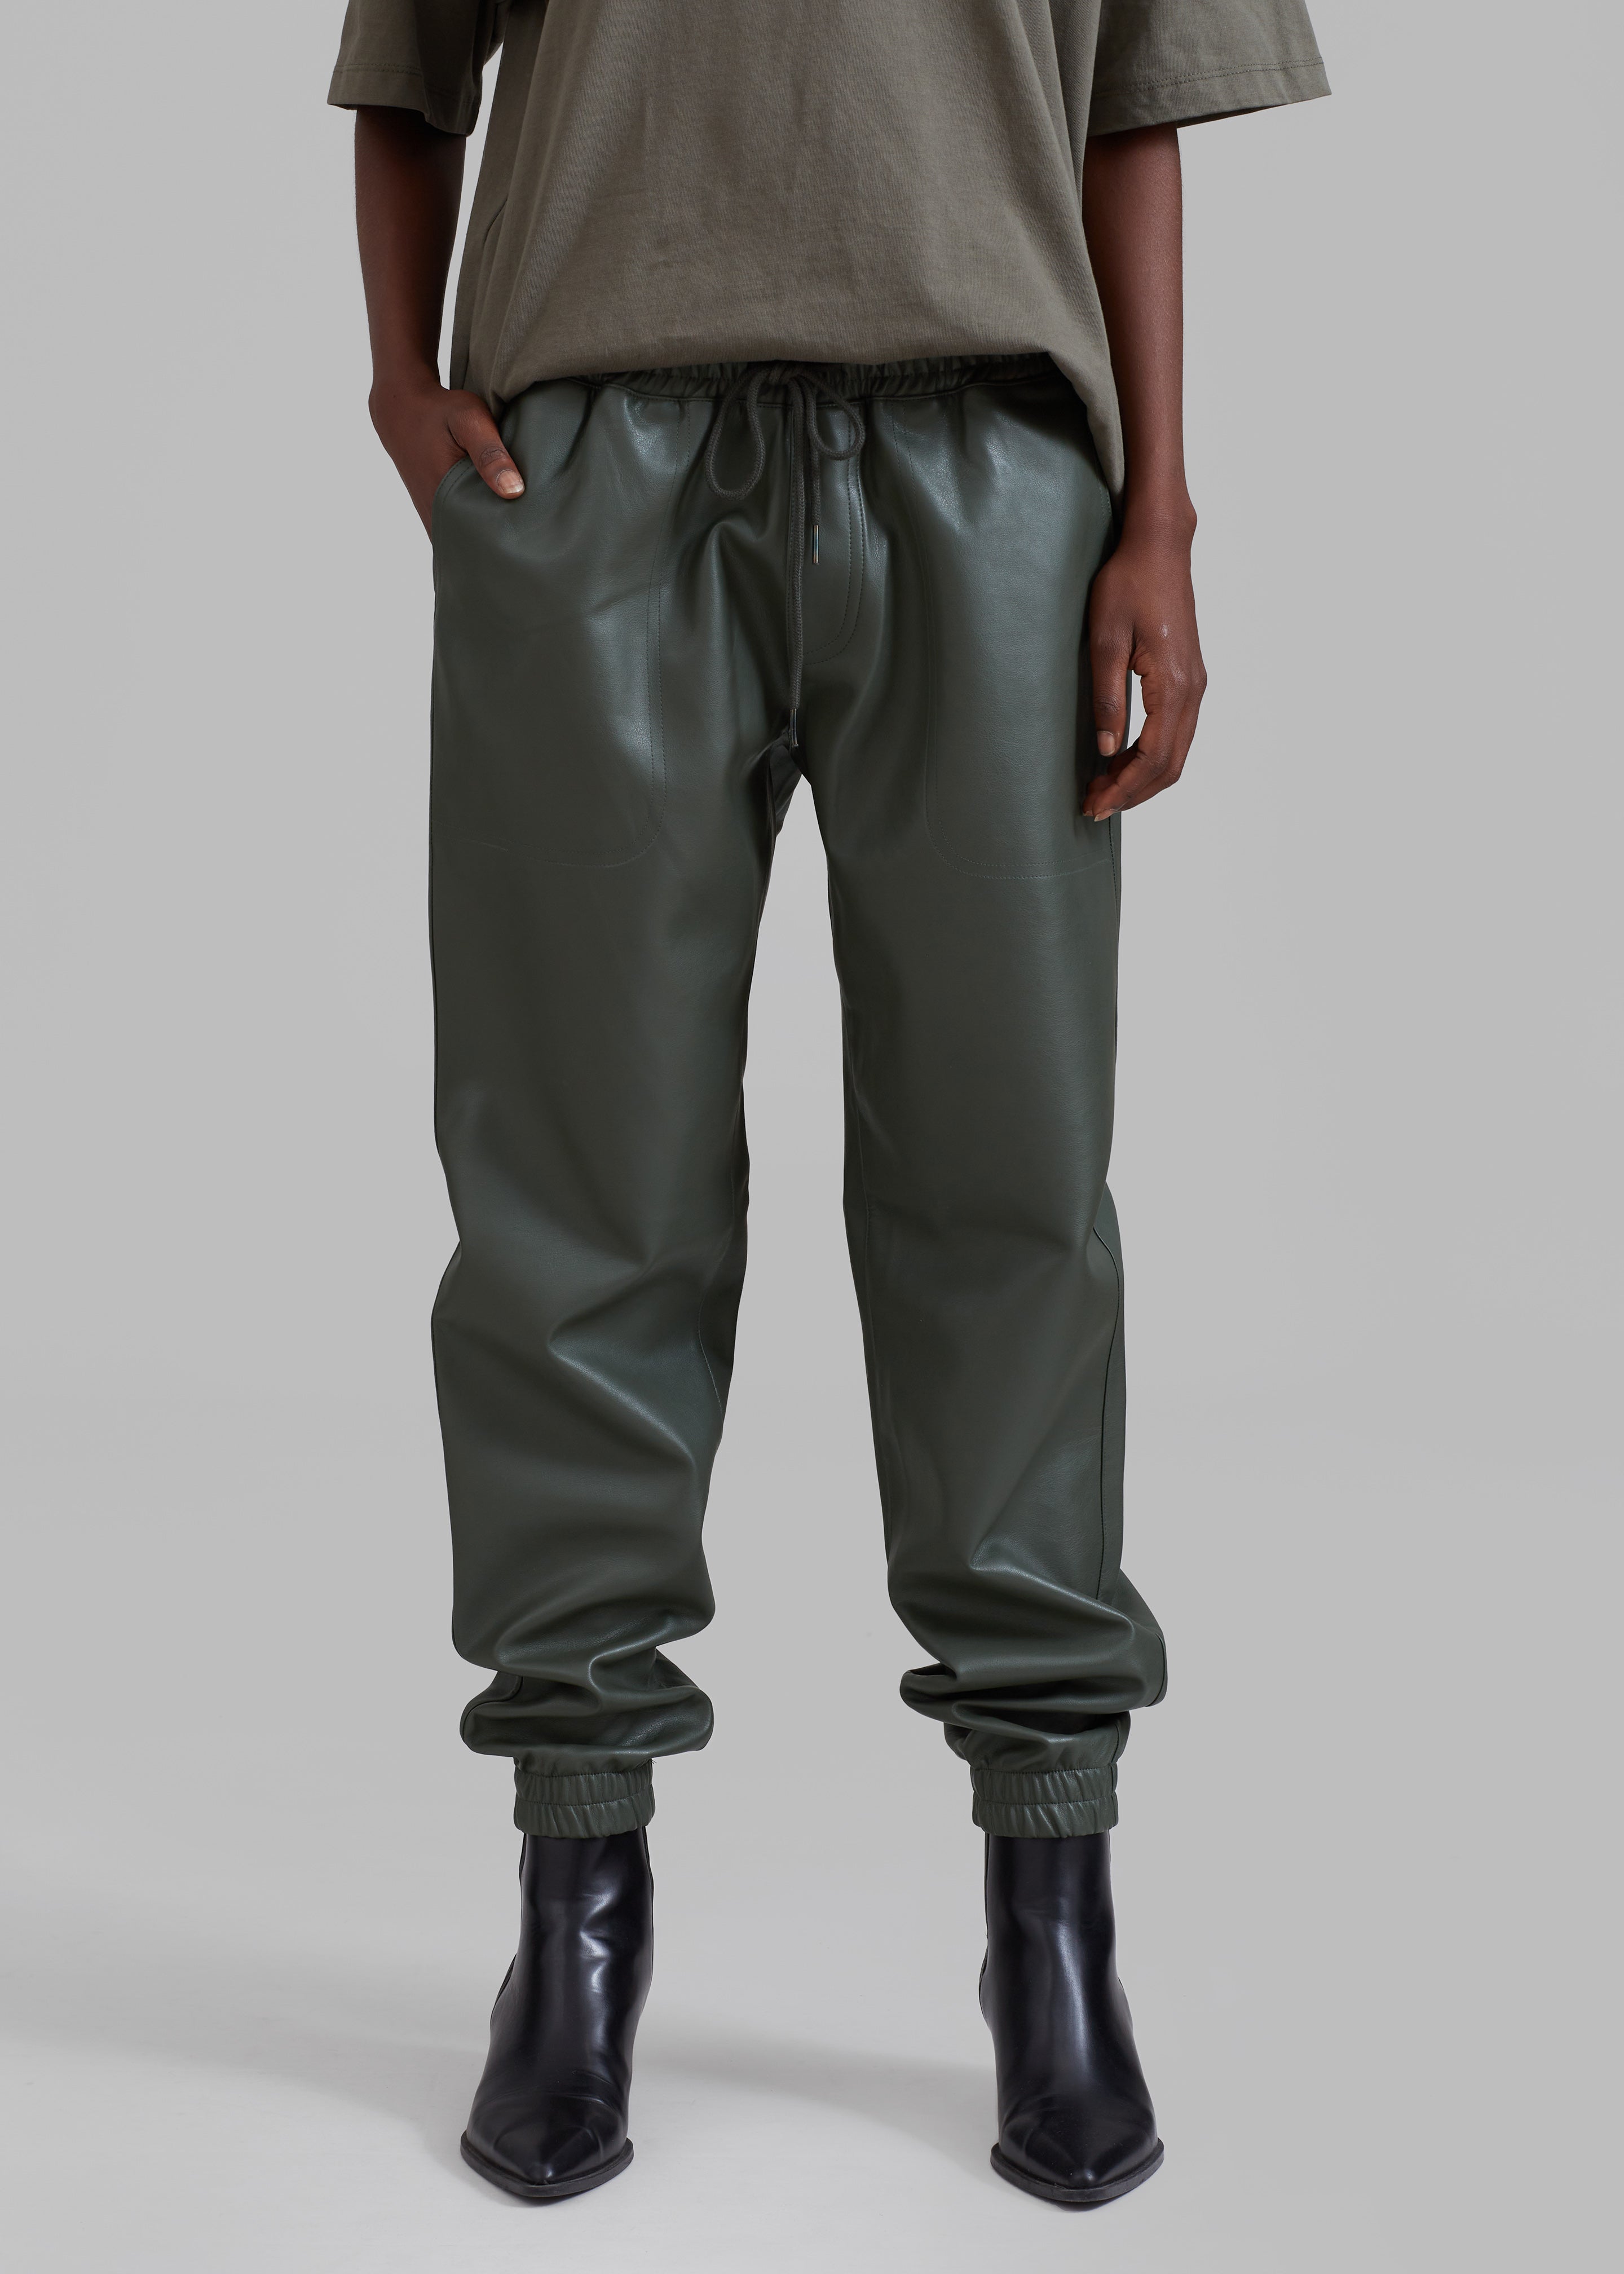 Brighton Faux Leather Joggers - Olive - 5